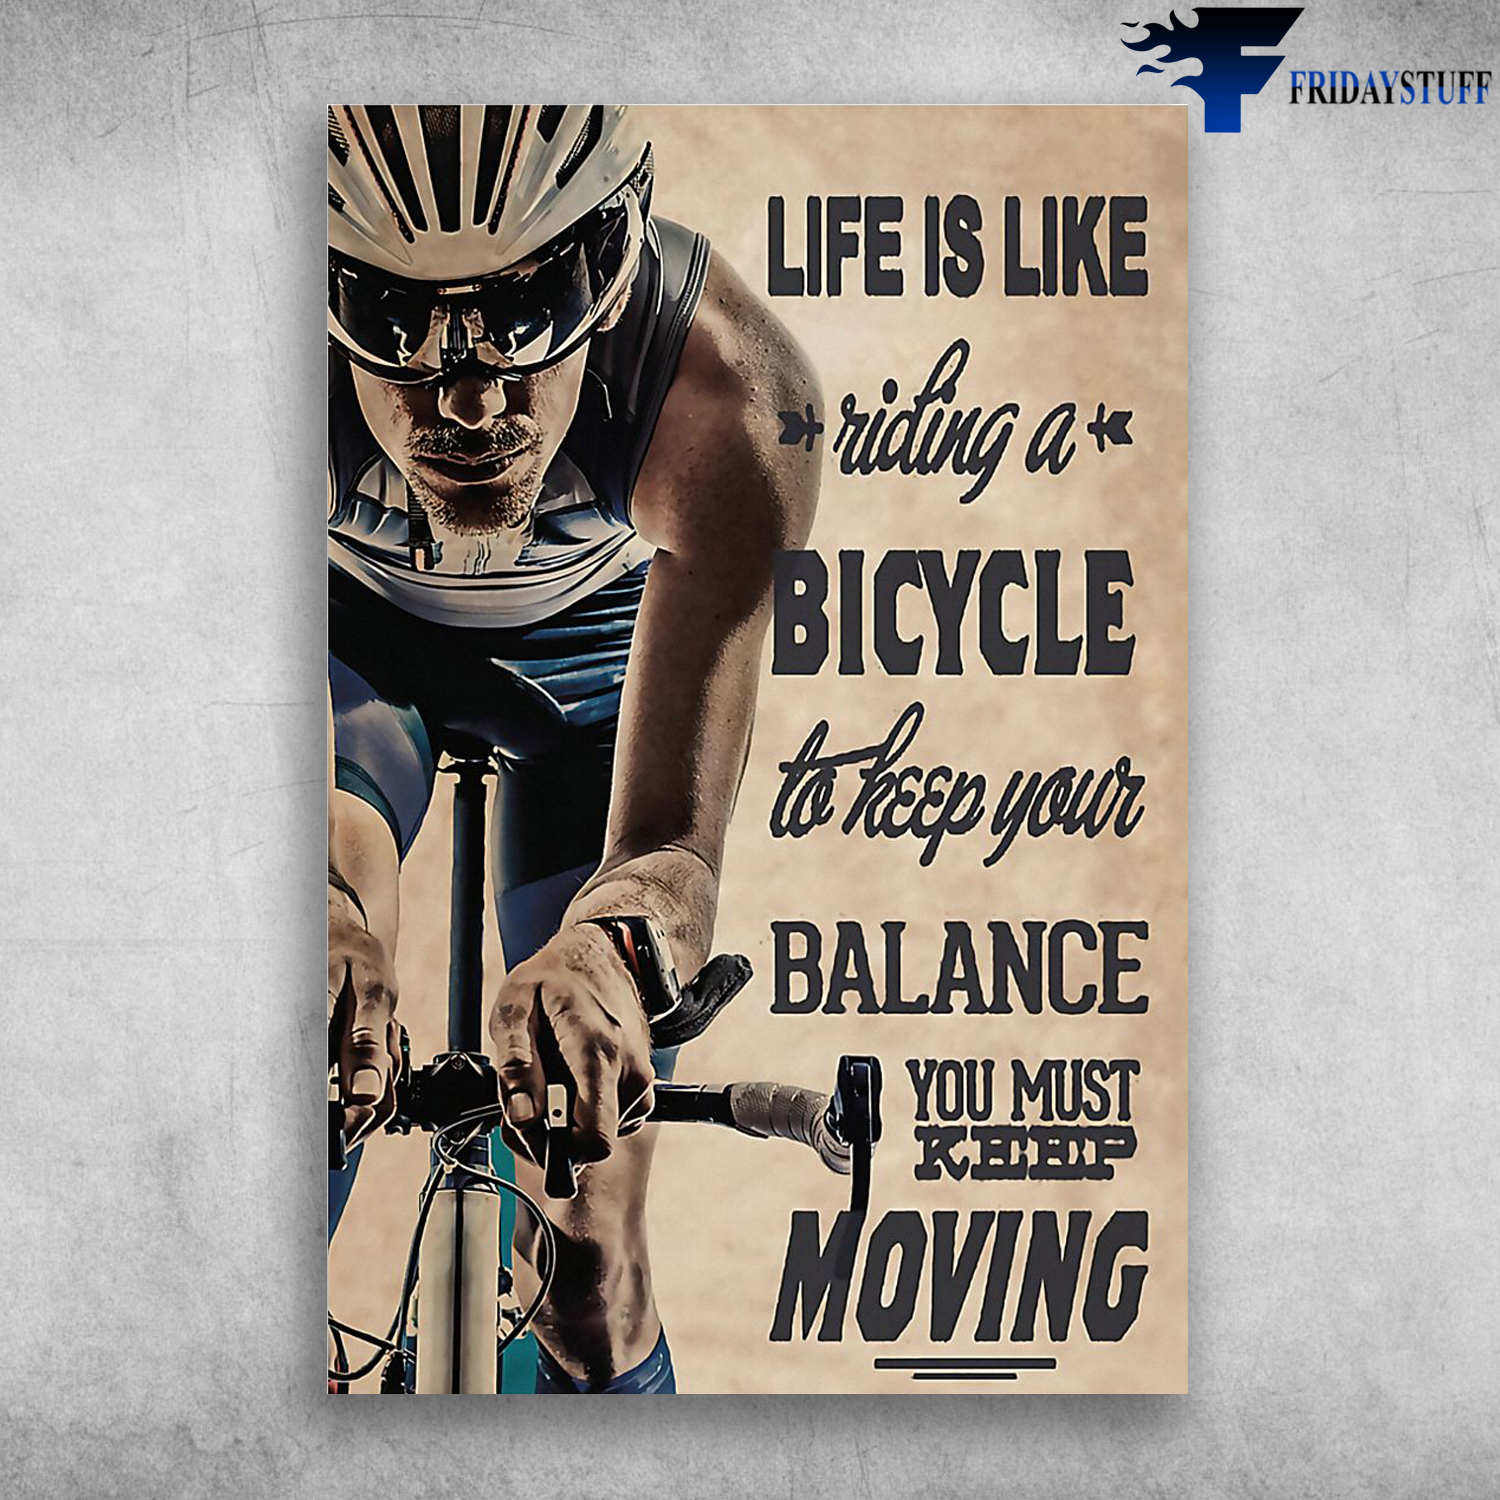 The Man Riding A Bicycle - Life Is Like Riding A Bicycle To Keep Your Balance